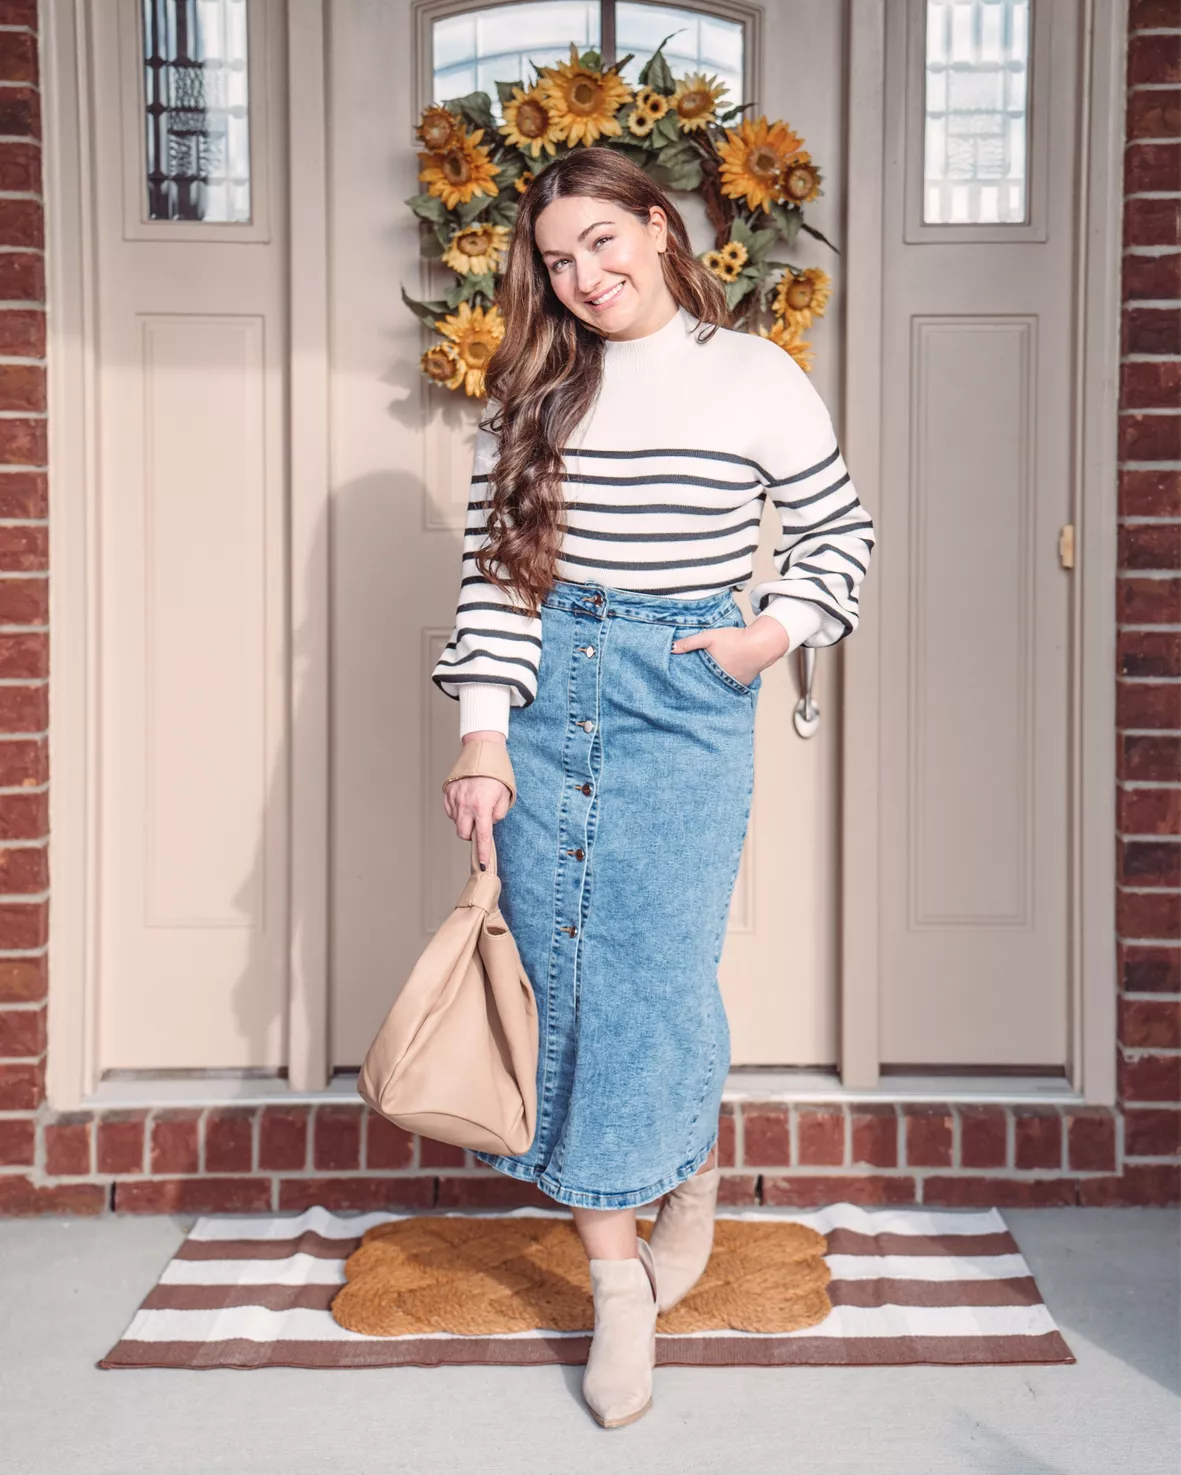 How to Style Denim Maxi Skirts  Skirt trends, Maxi skirt outfits